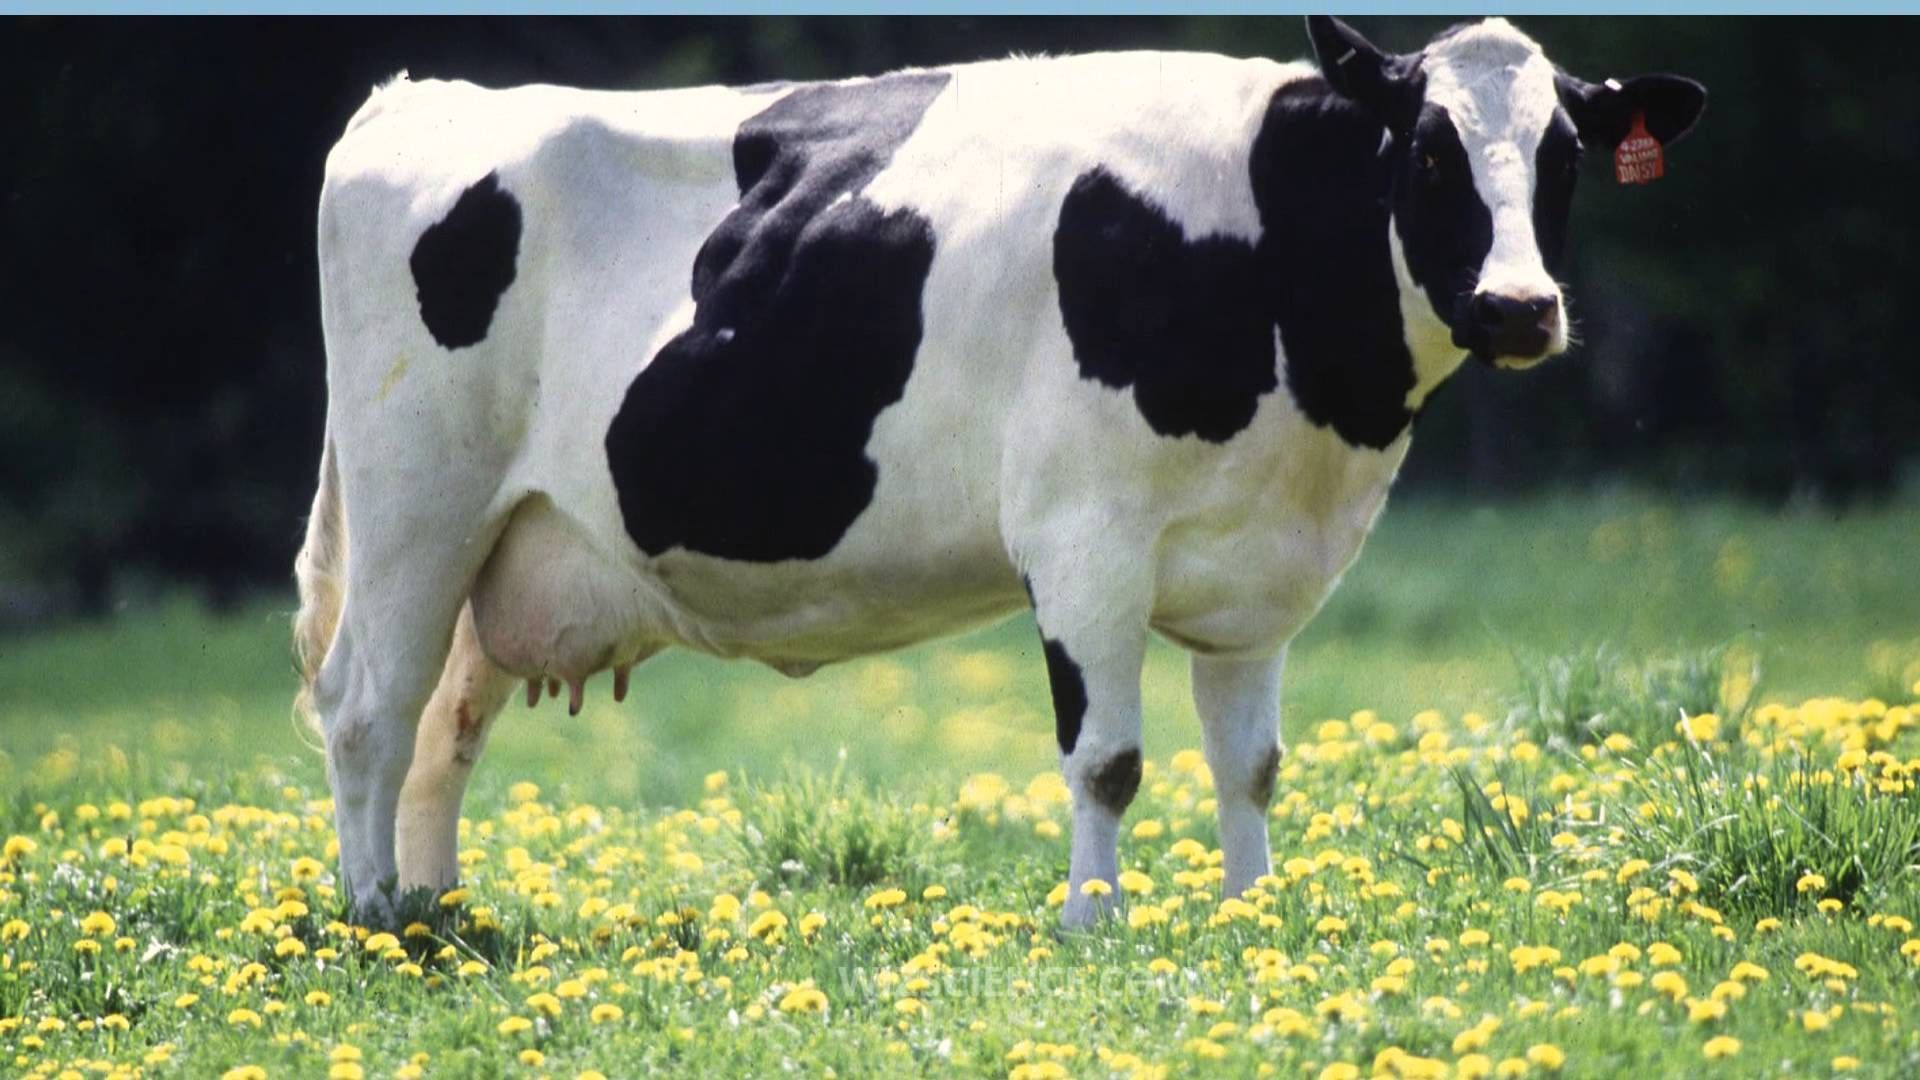 Dairy Cow Images - Free Download on Freepik